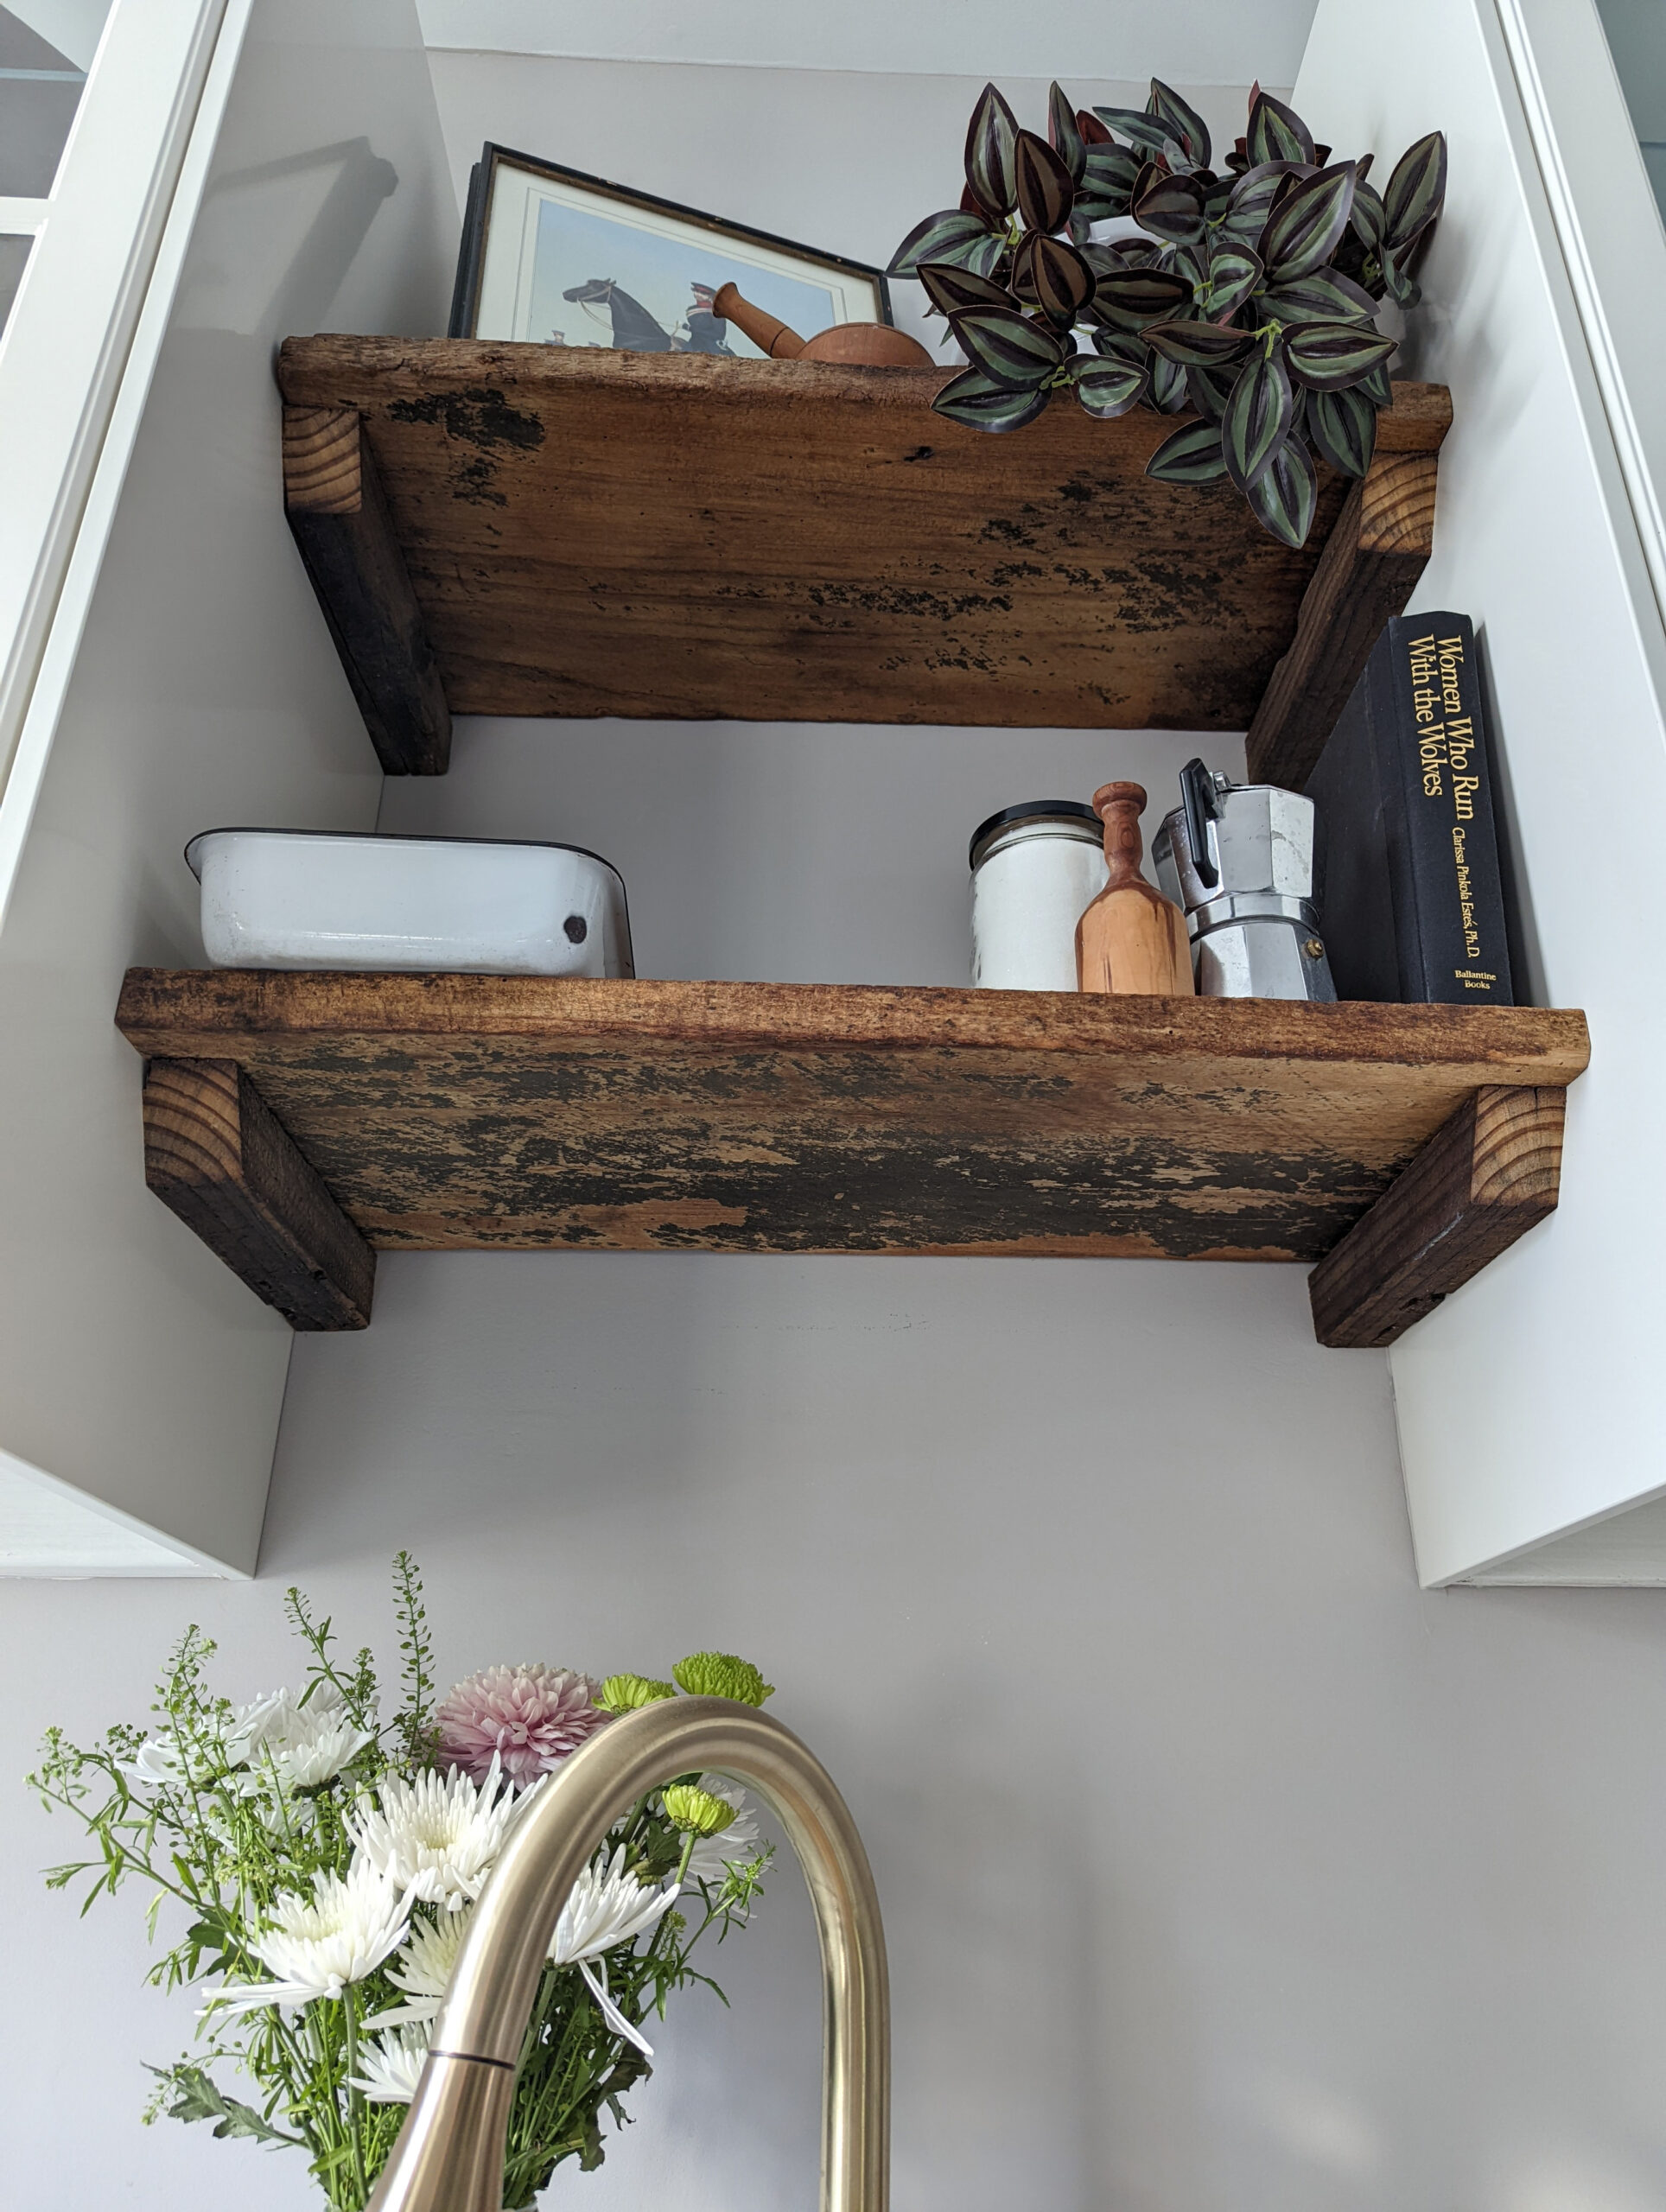 Reclaimed distressed lumber shelving, shown from below.